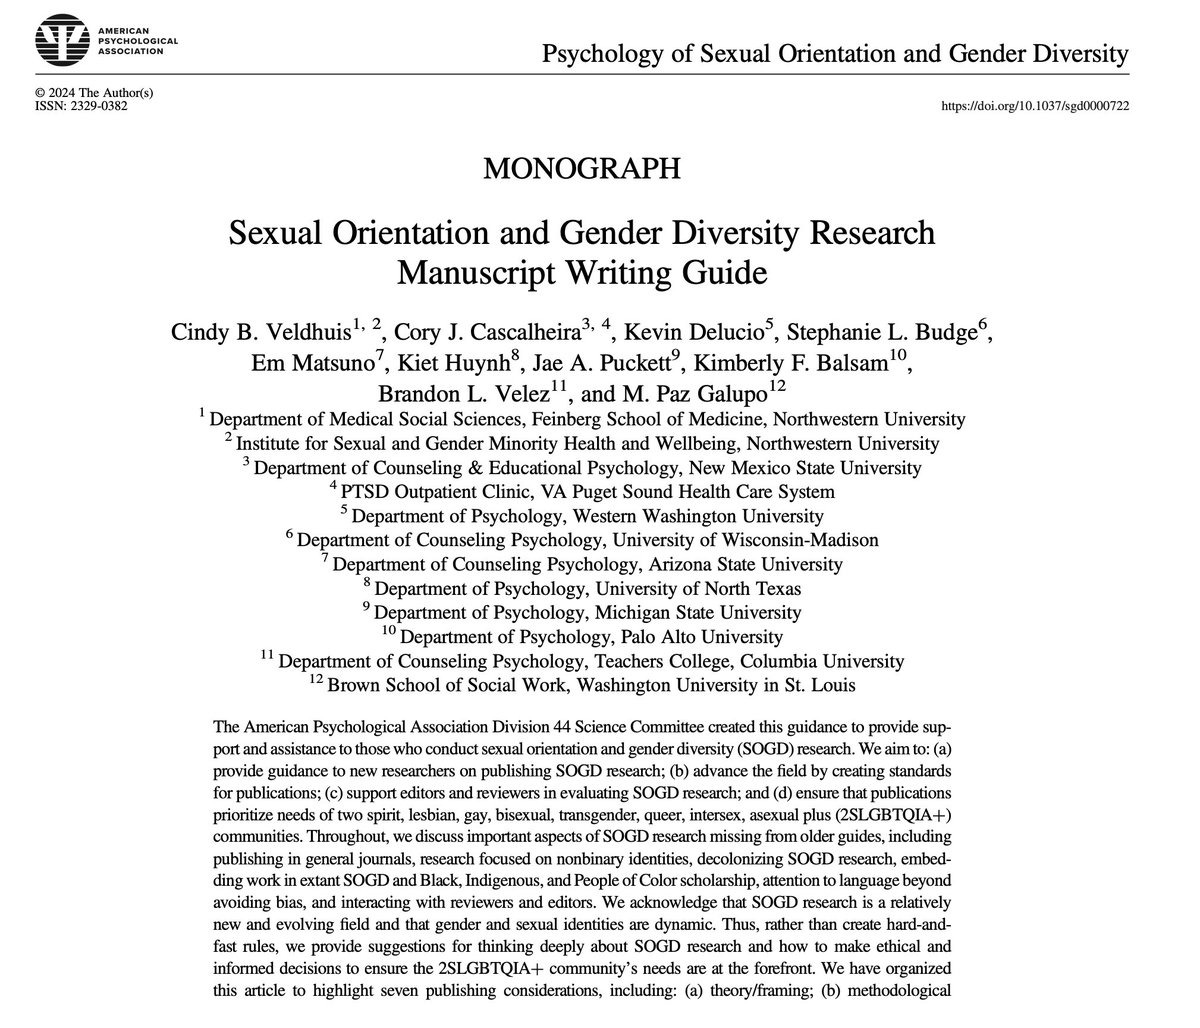 VERY EXCITING NEWS!!! Our guide on how to write LGBTQ+ research manuscripts is now available online in all of its extremely long glory! This was such a labor of love among an amazing team of researchers, clinicians, mentors, and students. psycnet.apa.org/fulltext/2024-…